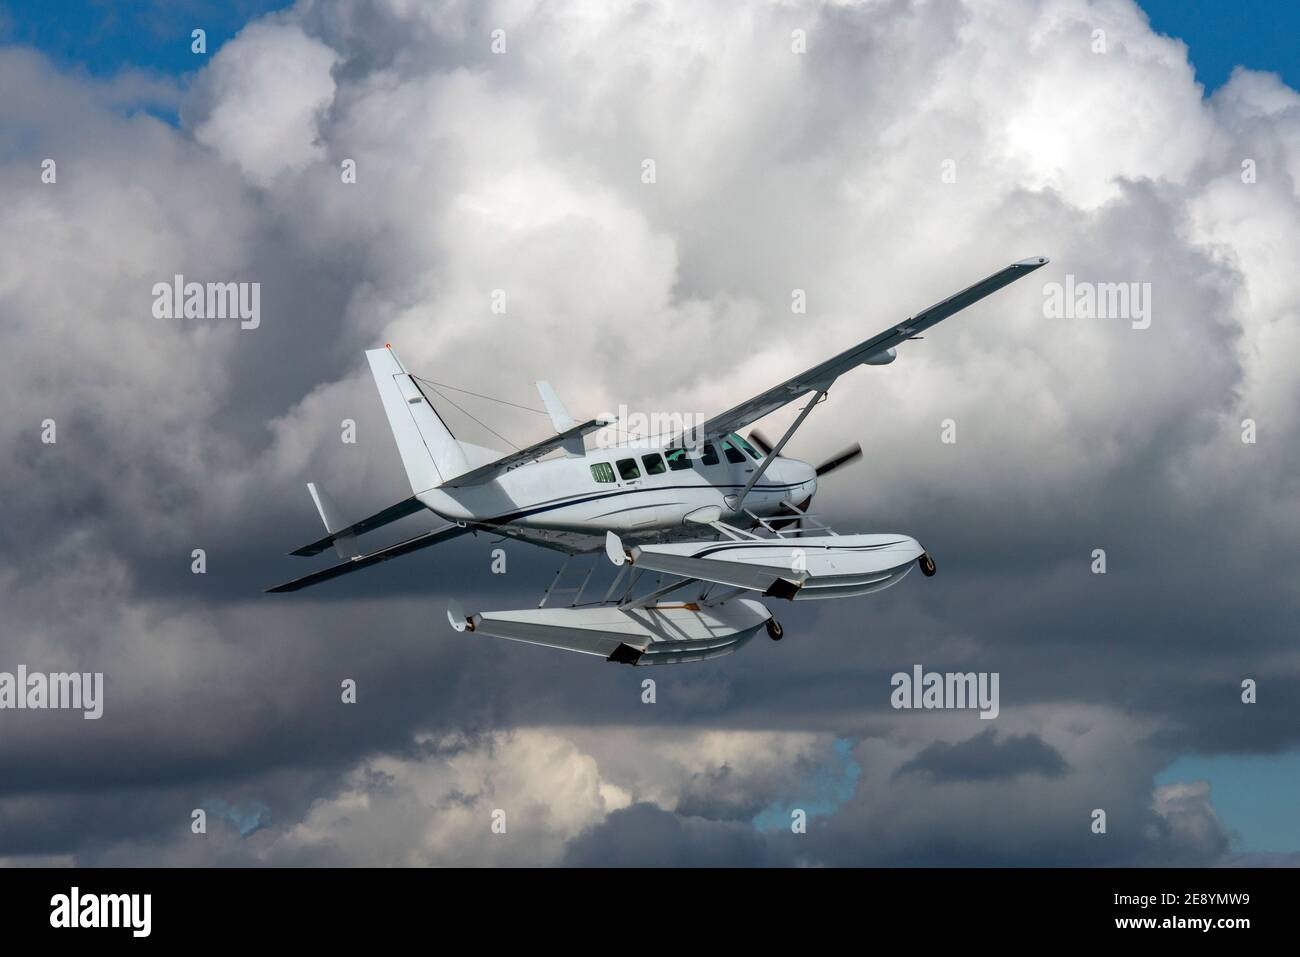 An air to air portrait of a Cessna 208 Grand Caravan float plane approaching turbulent clouds. Stock Photo